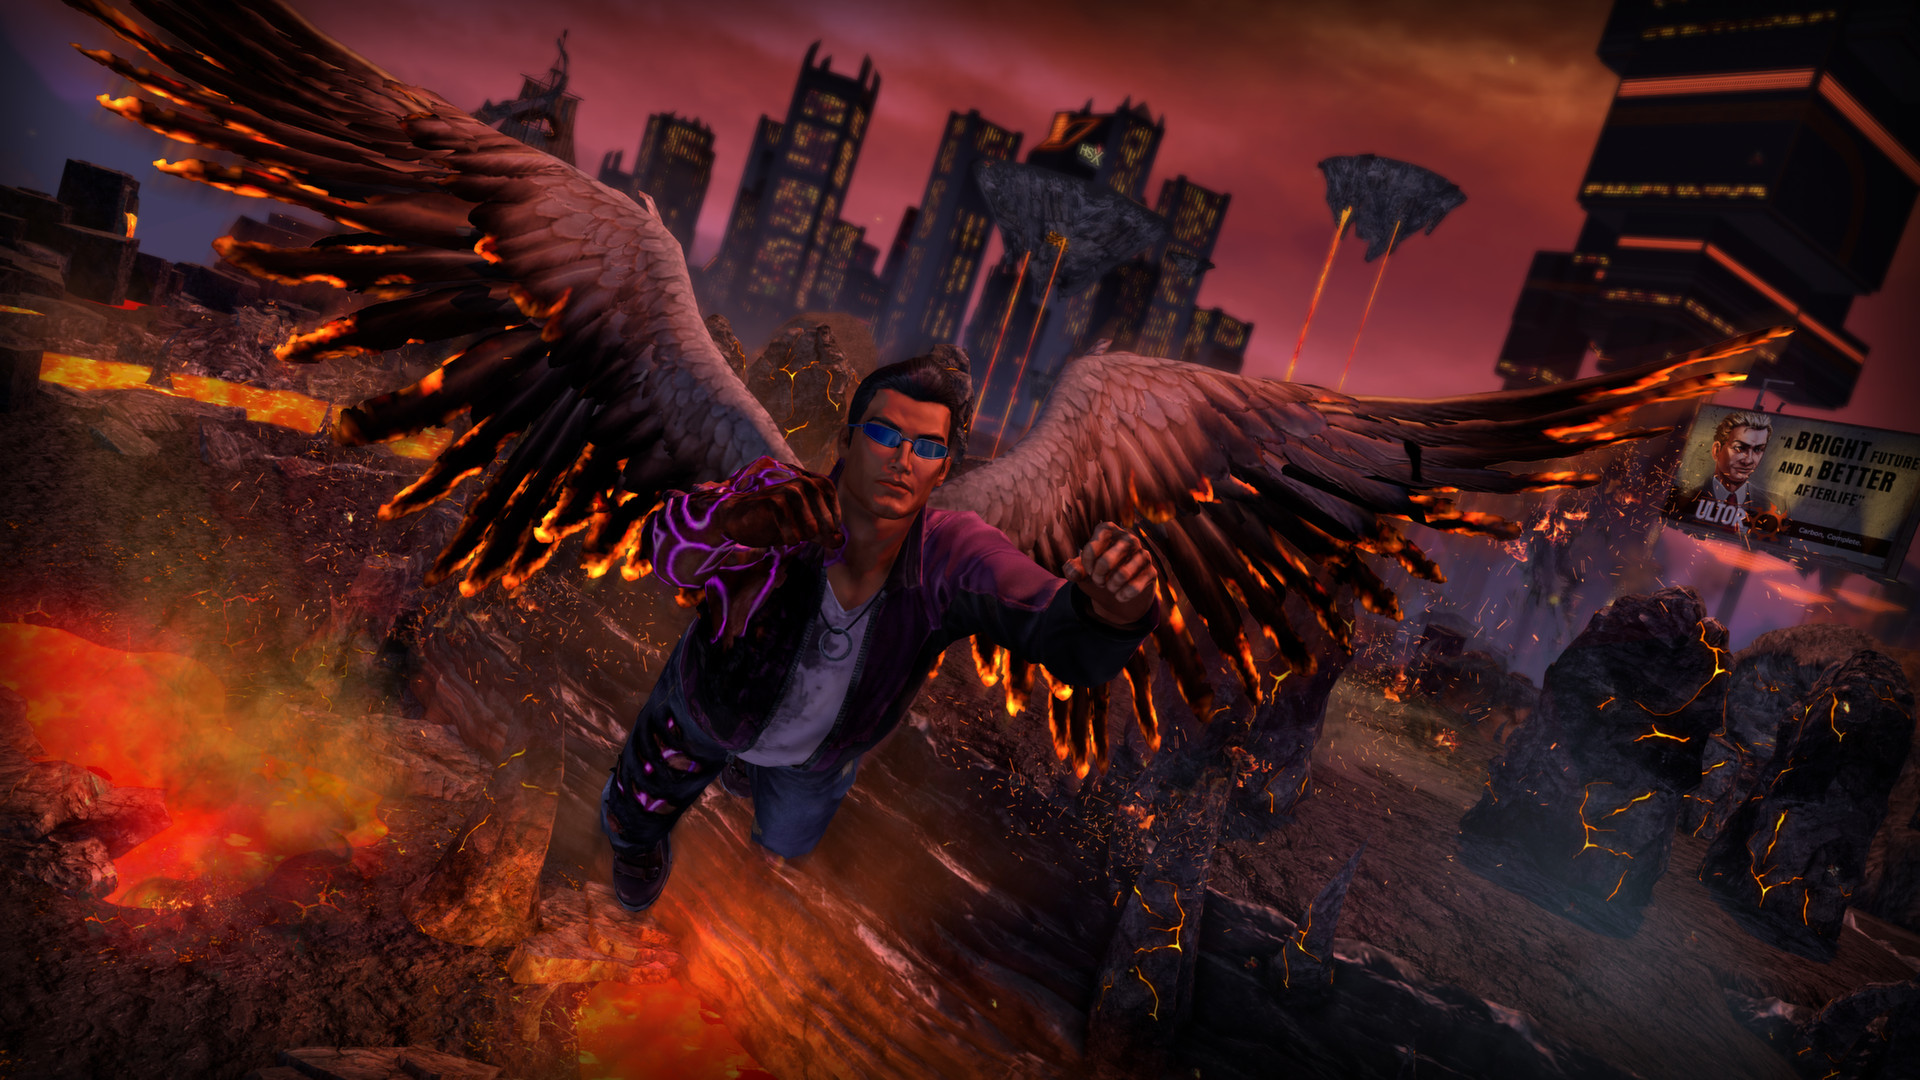 Buy Saints Row: Gat out of Hell